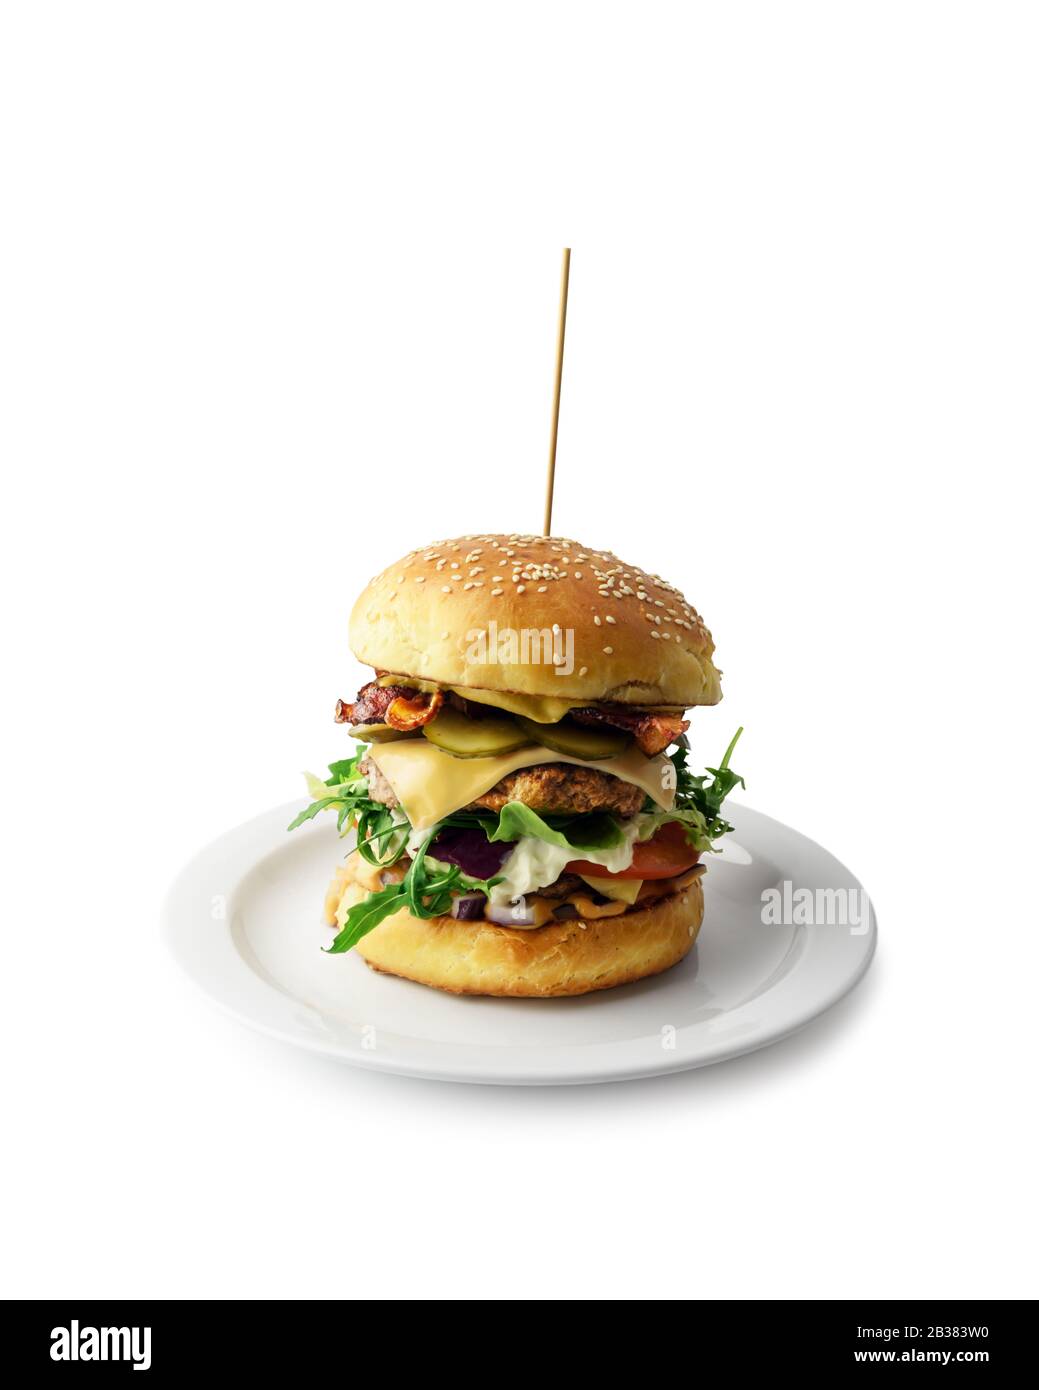 Appetizing cheeseburger on plate isolated on white. Food photography Stock Photo